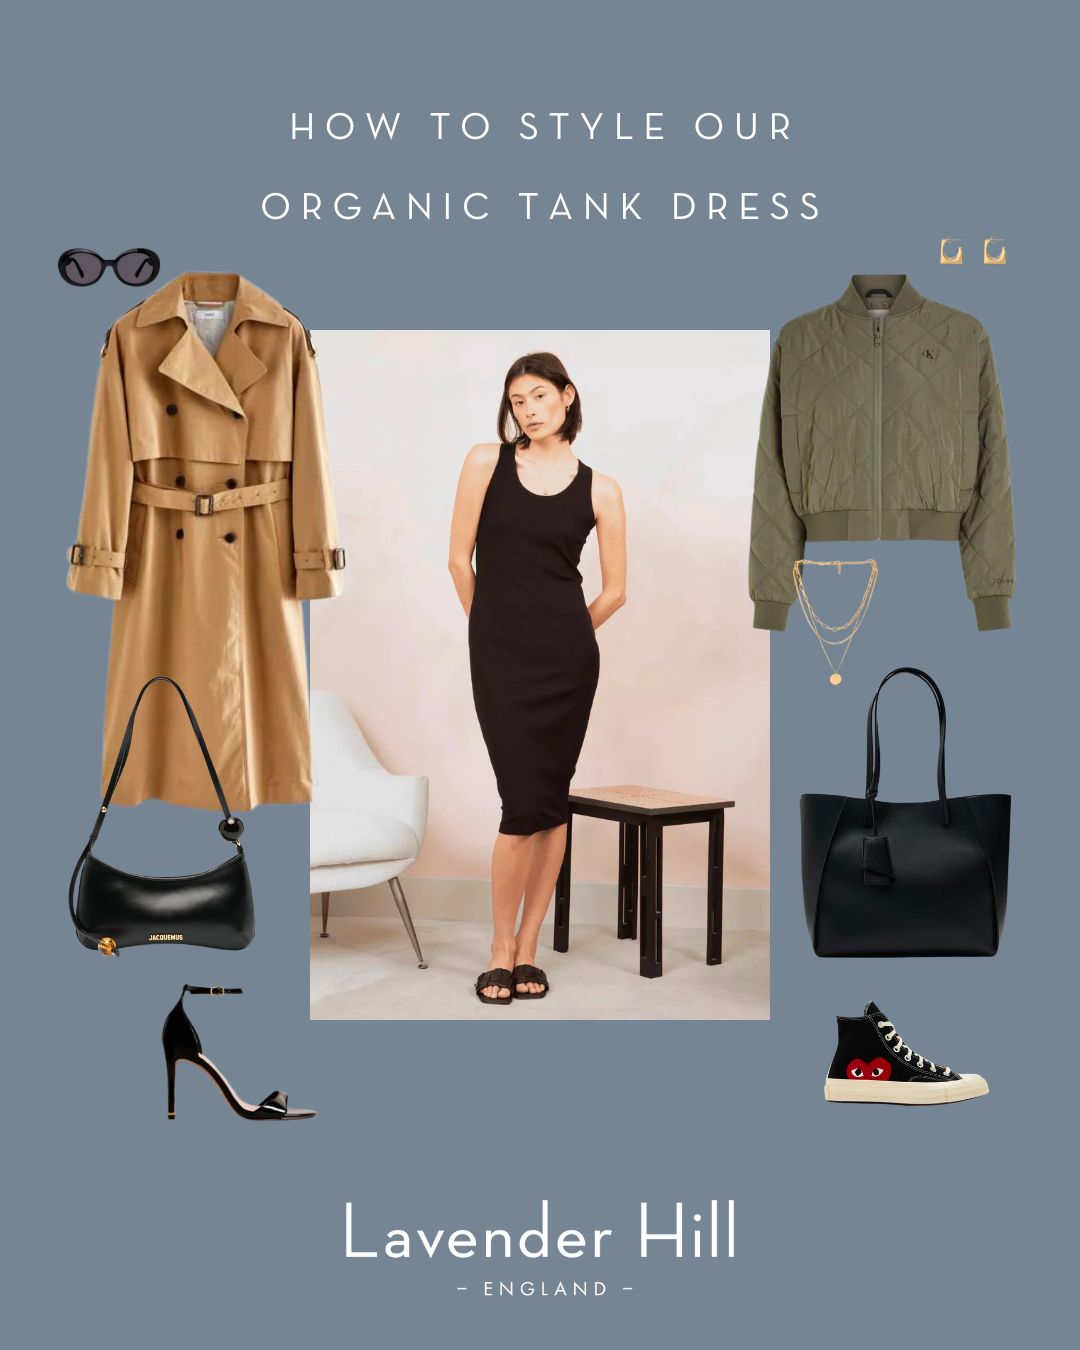 How to style a tank dress for different seasons